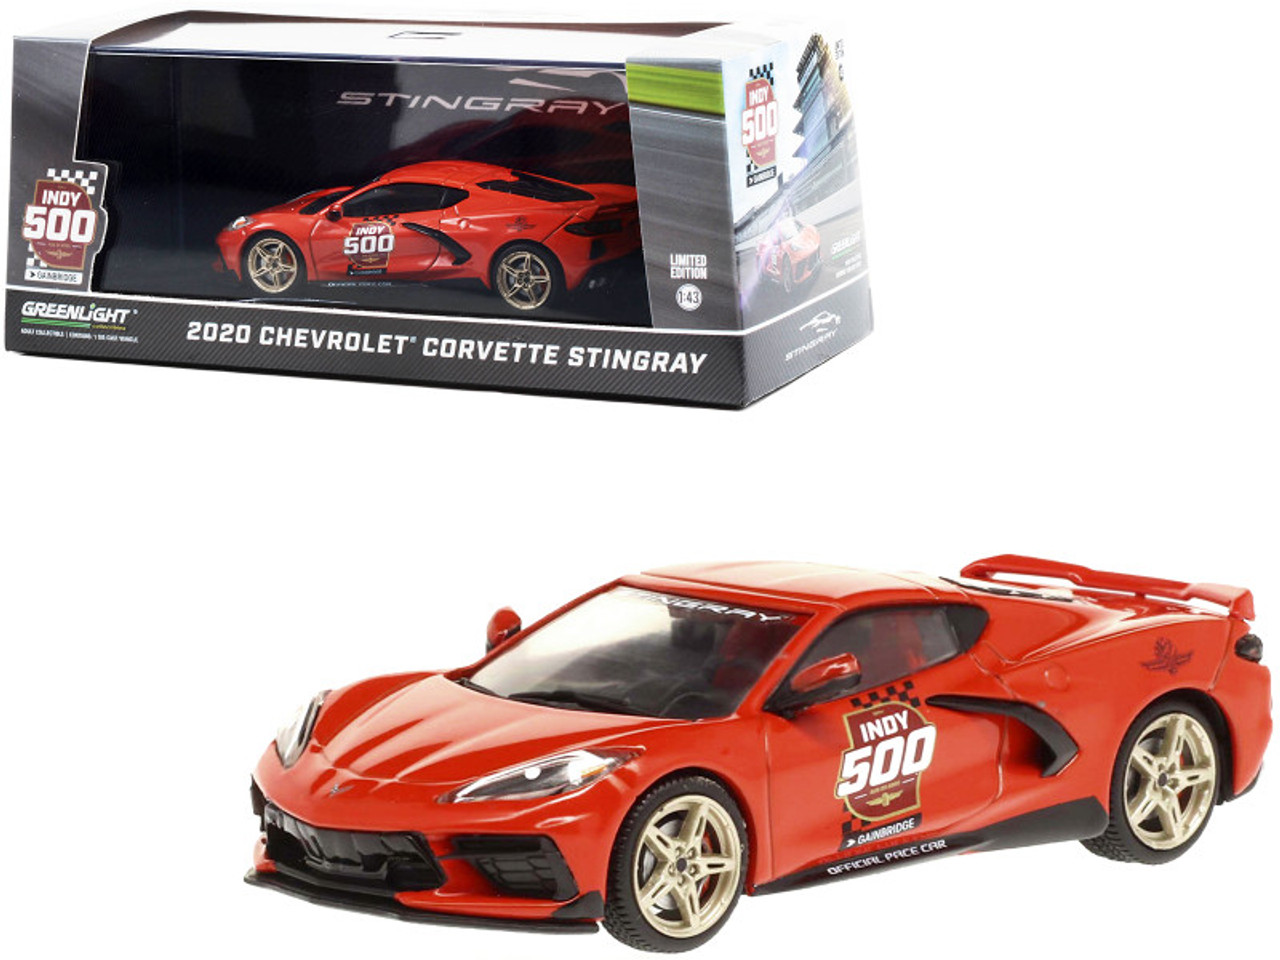 2020 Chevrolet Corvette C8 Stingray "104th Running of the Indianapolis 500 Official Pace Car" 1/43 Diecast Model Car by Greenlight